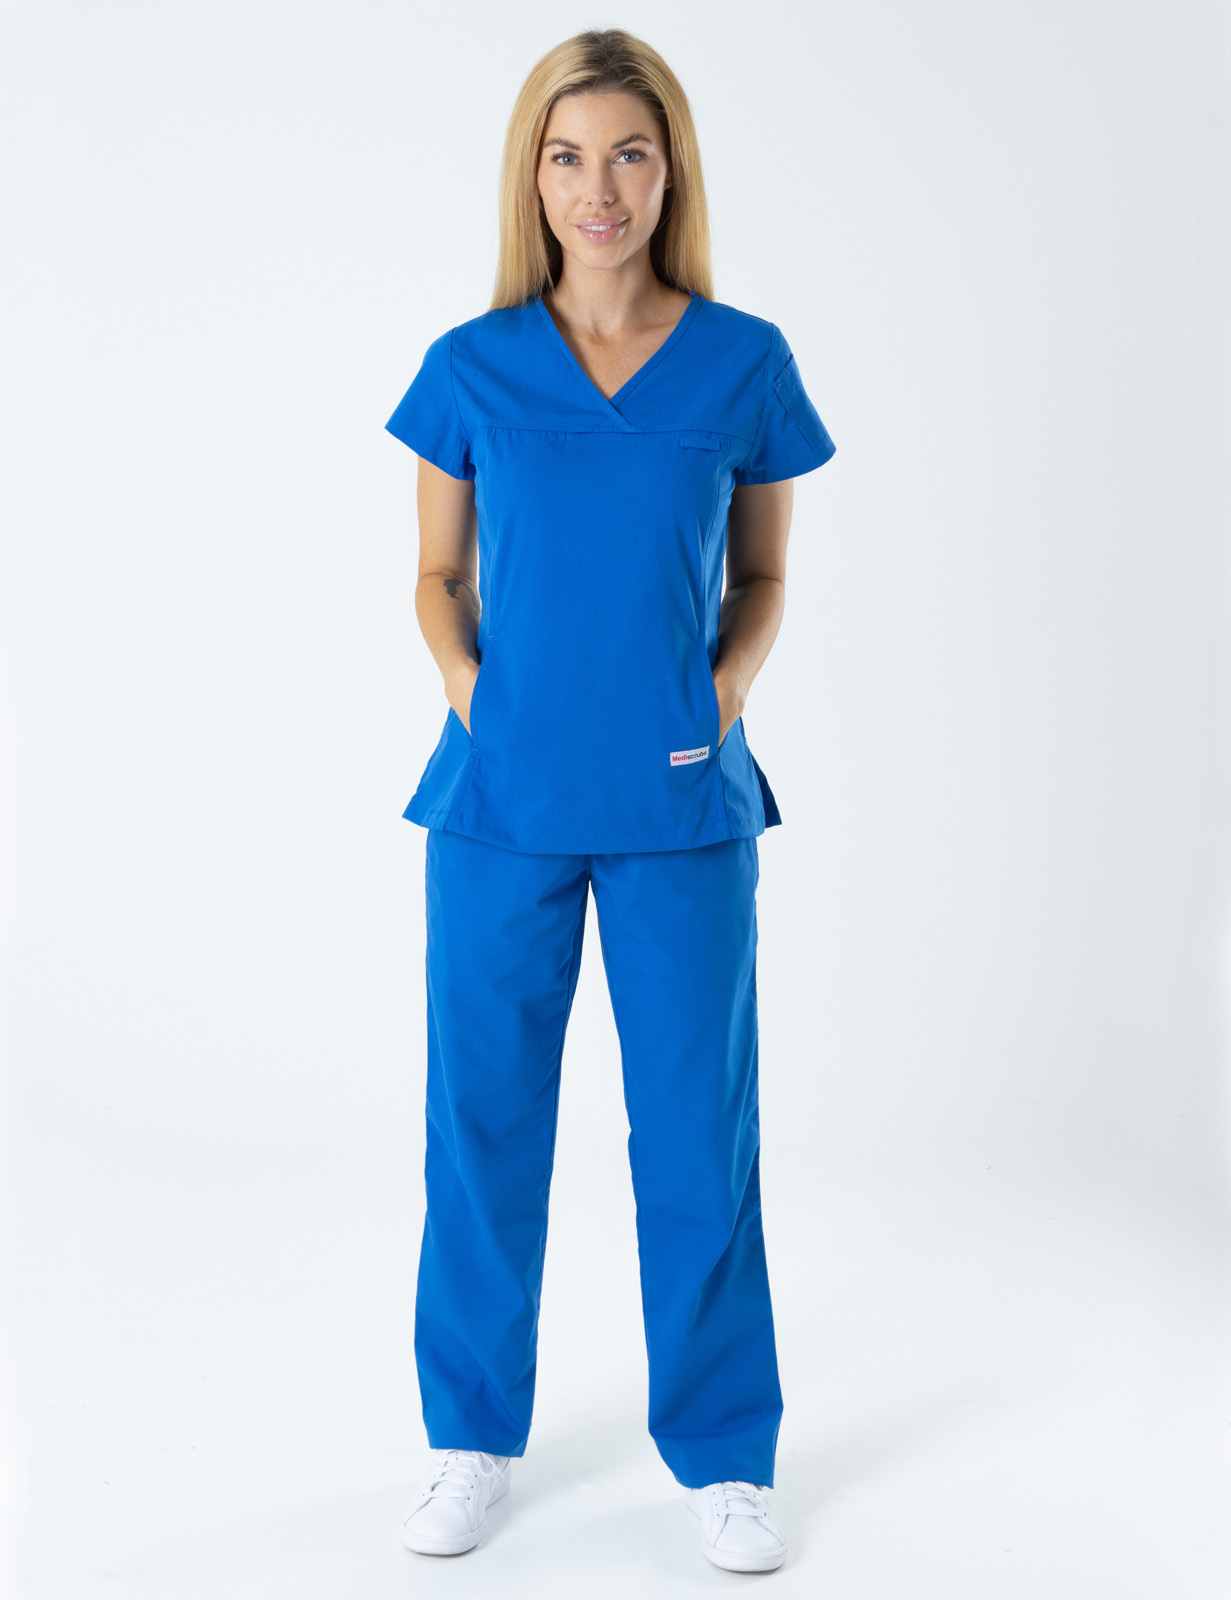 Tweed Health Super Clinic (Women's Fit Solid Scrub Top and Regular Pants in Royal incl Logos)